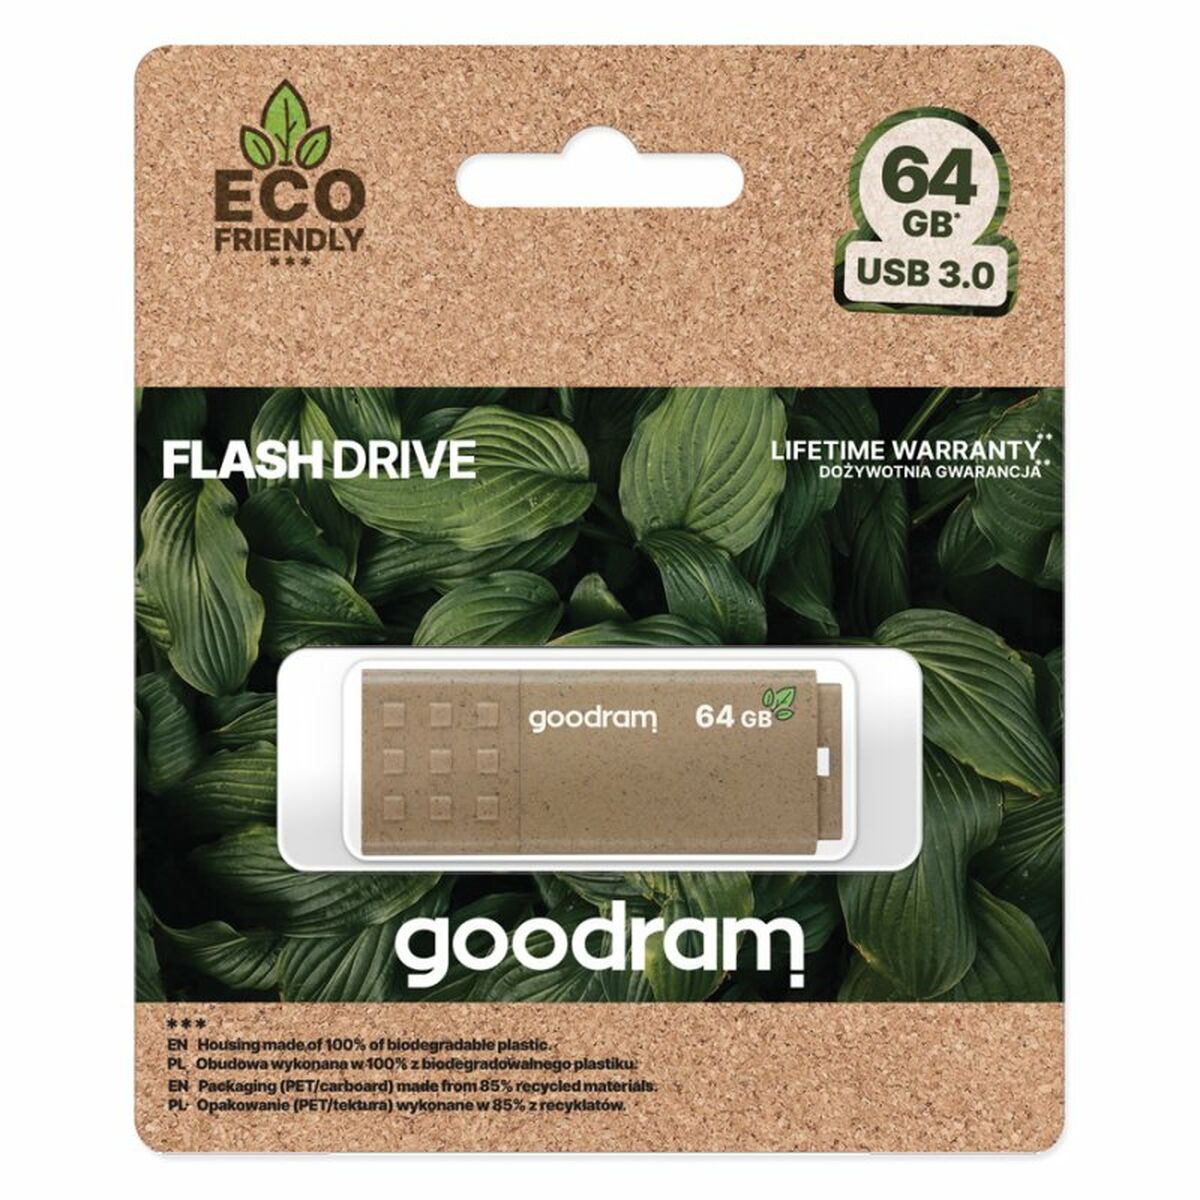 USB stick GoodRam UME3 Eco Friendly 64 GB, GoodRam, Computing, Data storage, usb-stick-goodram-ume3-eco-friendly-64-gb, Brand_GoodRam, category-reference-2609, category-reference-2803, category-reference-2817, category-reference-t-19685, category-reference-t-19909, category-reference-t-21355, computers / components, Condition_NEW, Price_20 - 50, Teleworking, RiotNook